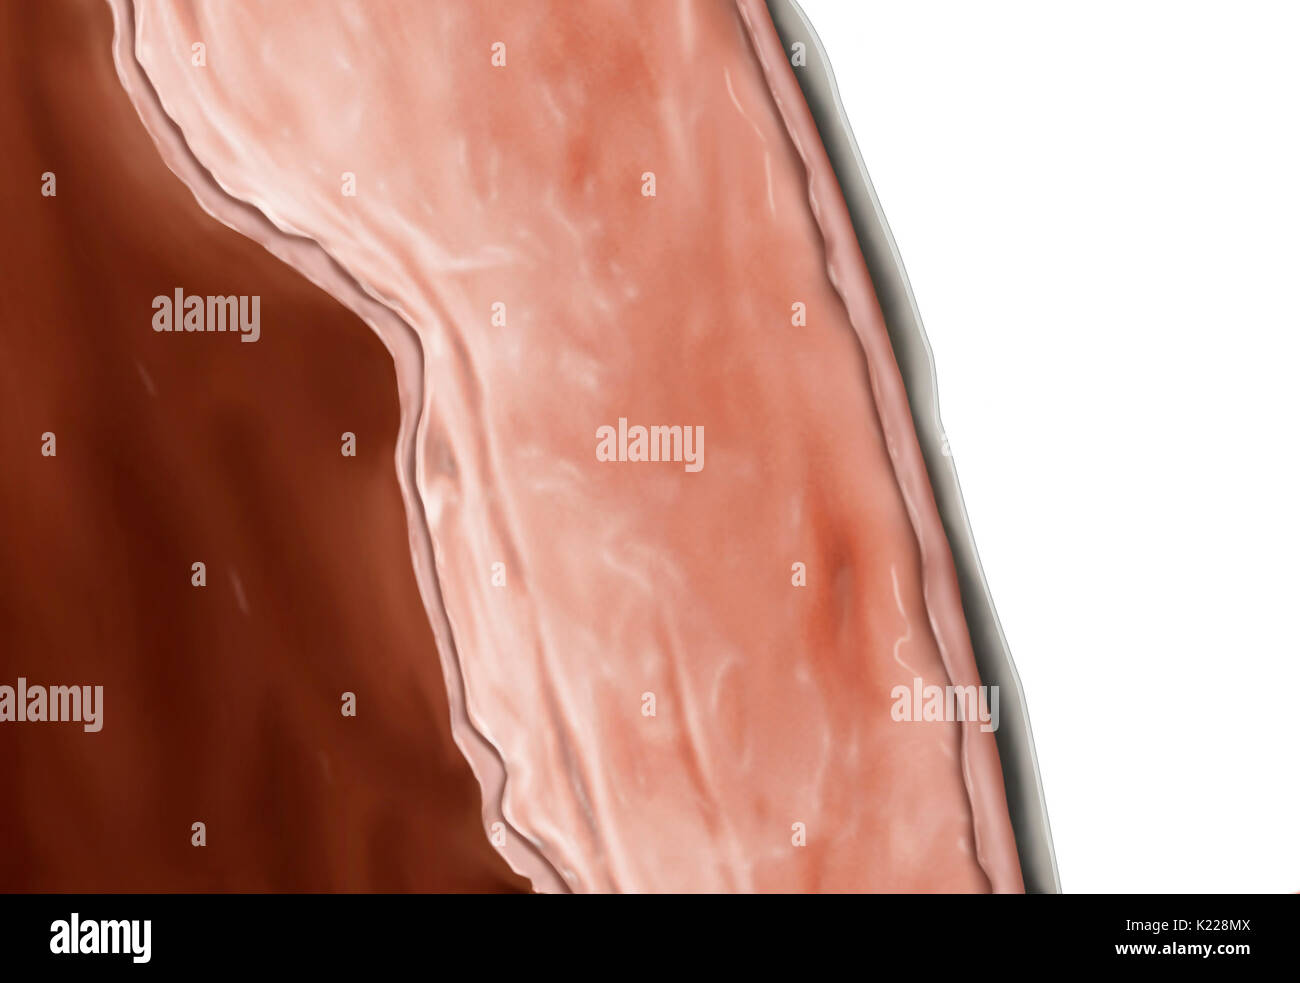 The myocardium consists of muscular fibers that form the thickest layer of the cardiac wall. Stock Photo